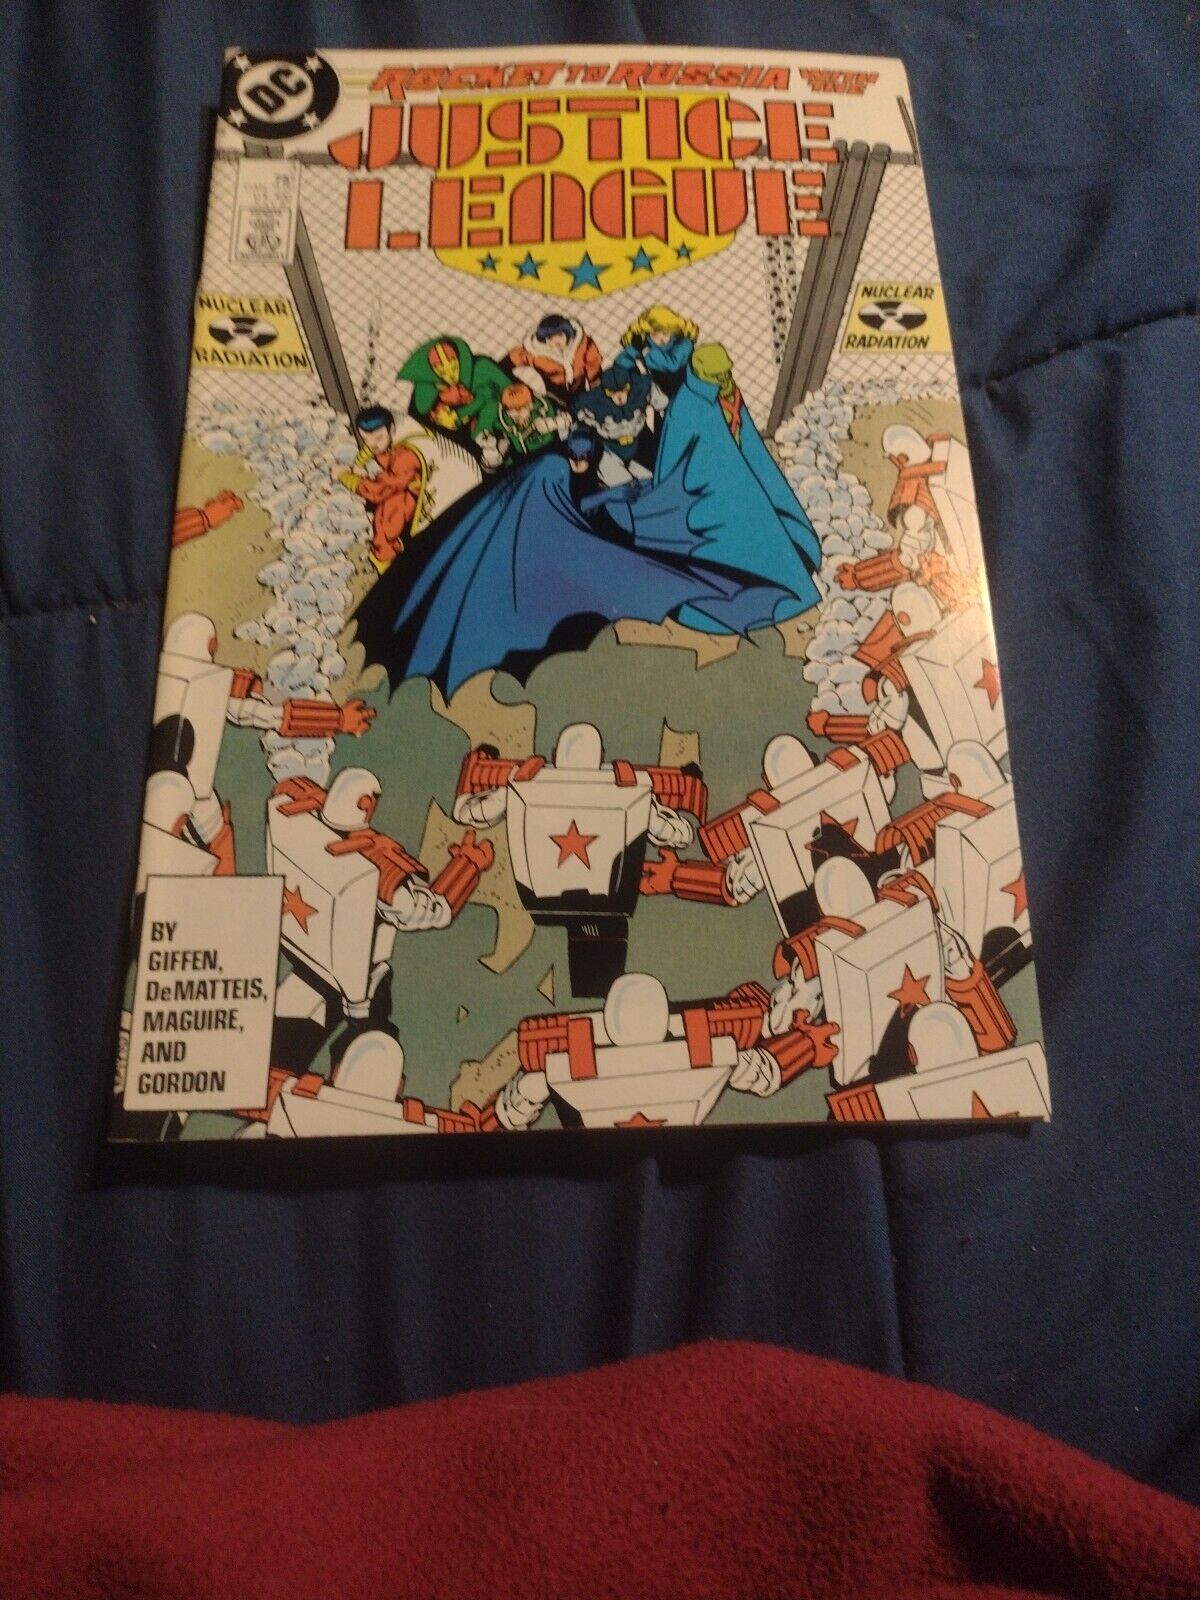 Rocket to Russia with the Justice League Issue # 3 DC Comics 1987